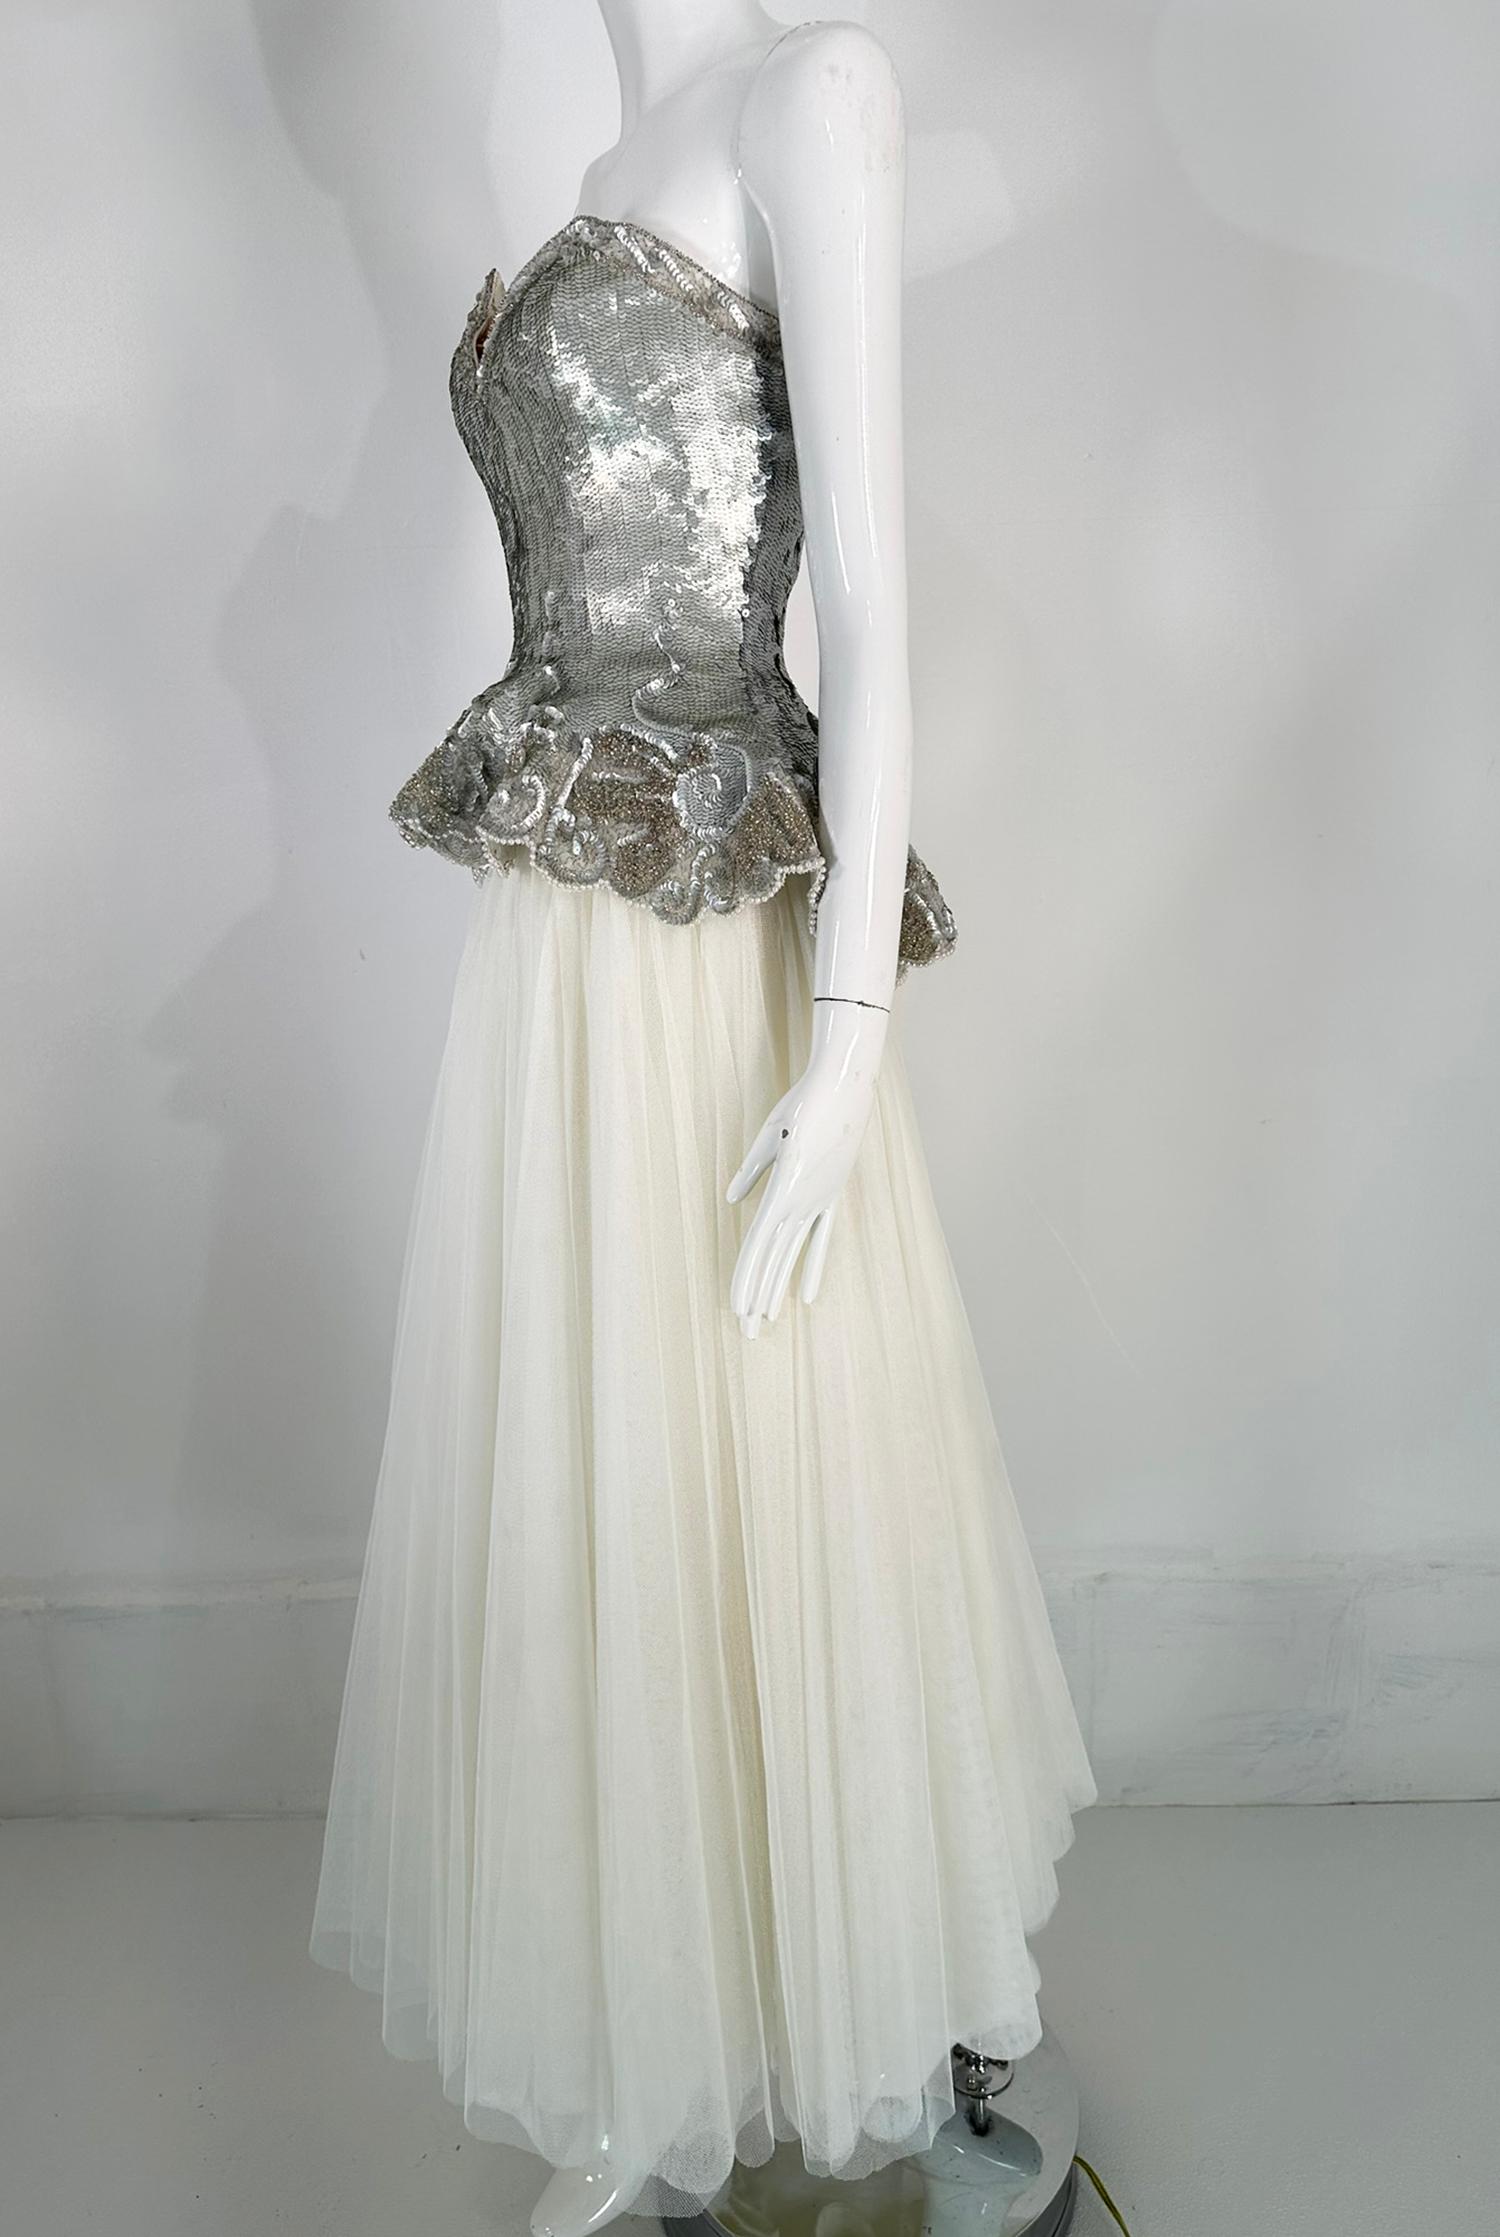 Fabrice Gold & Silver Sequin Peplum Hem Bustier with White Tulle Layered Skirt 7